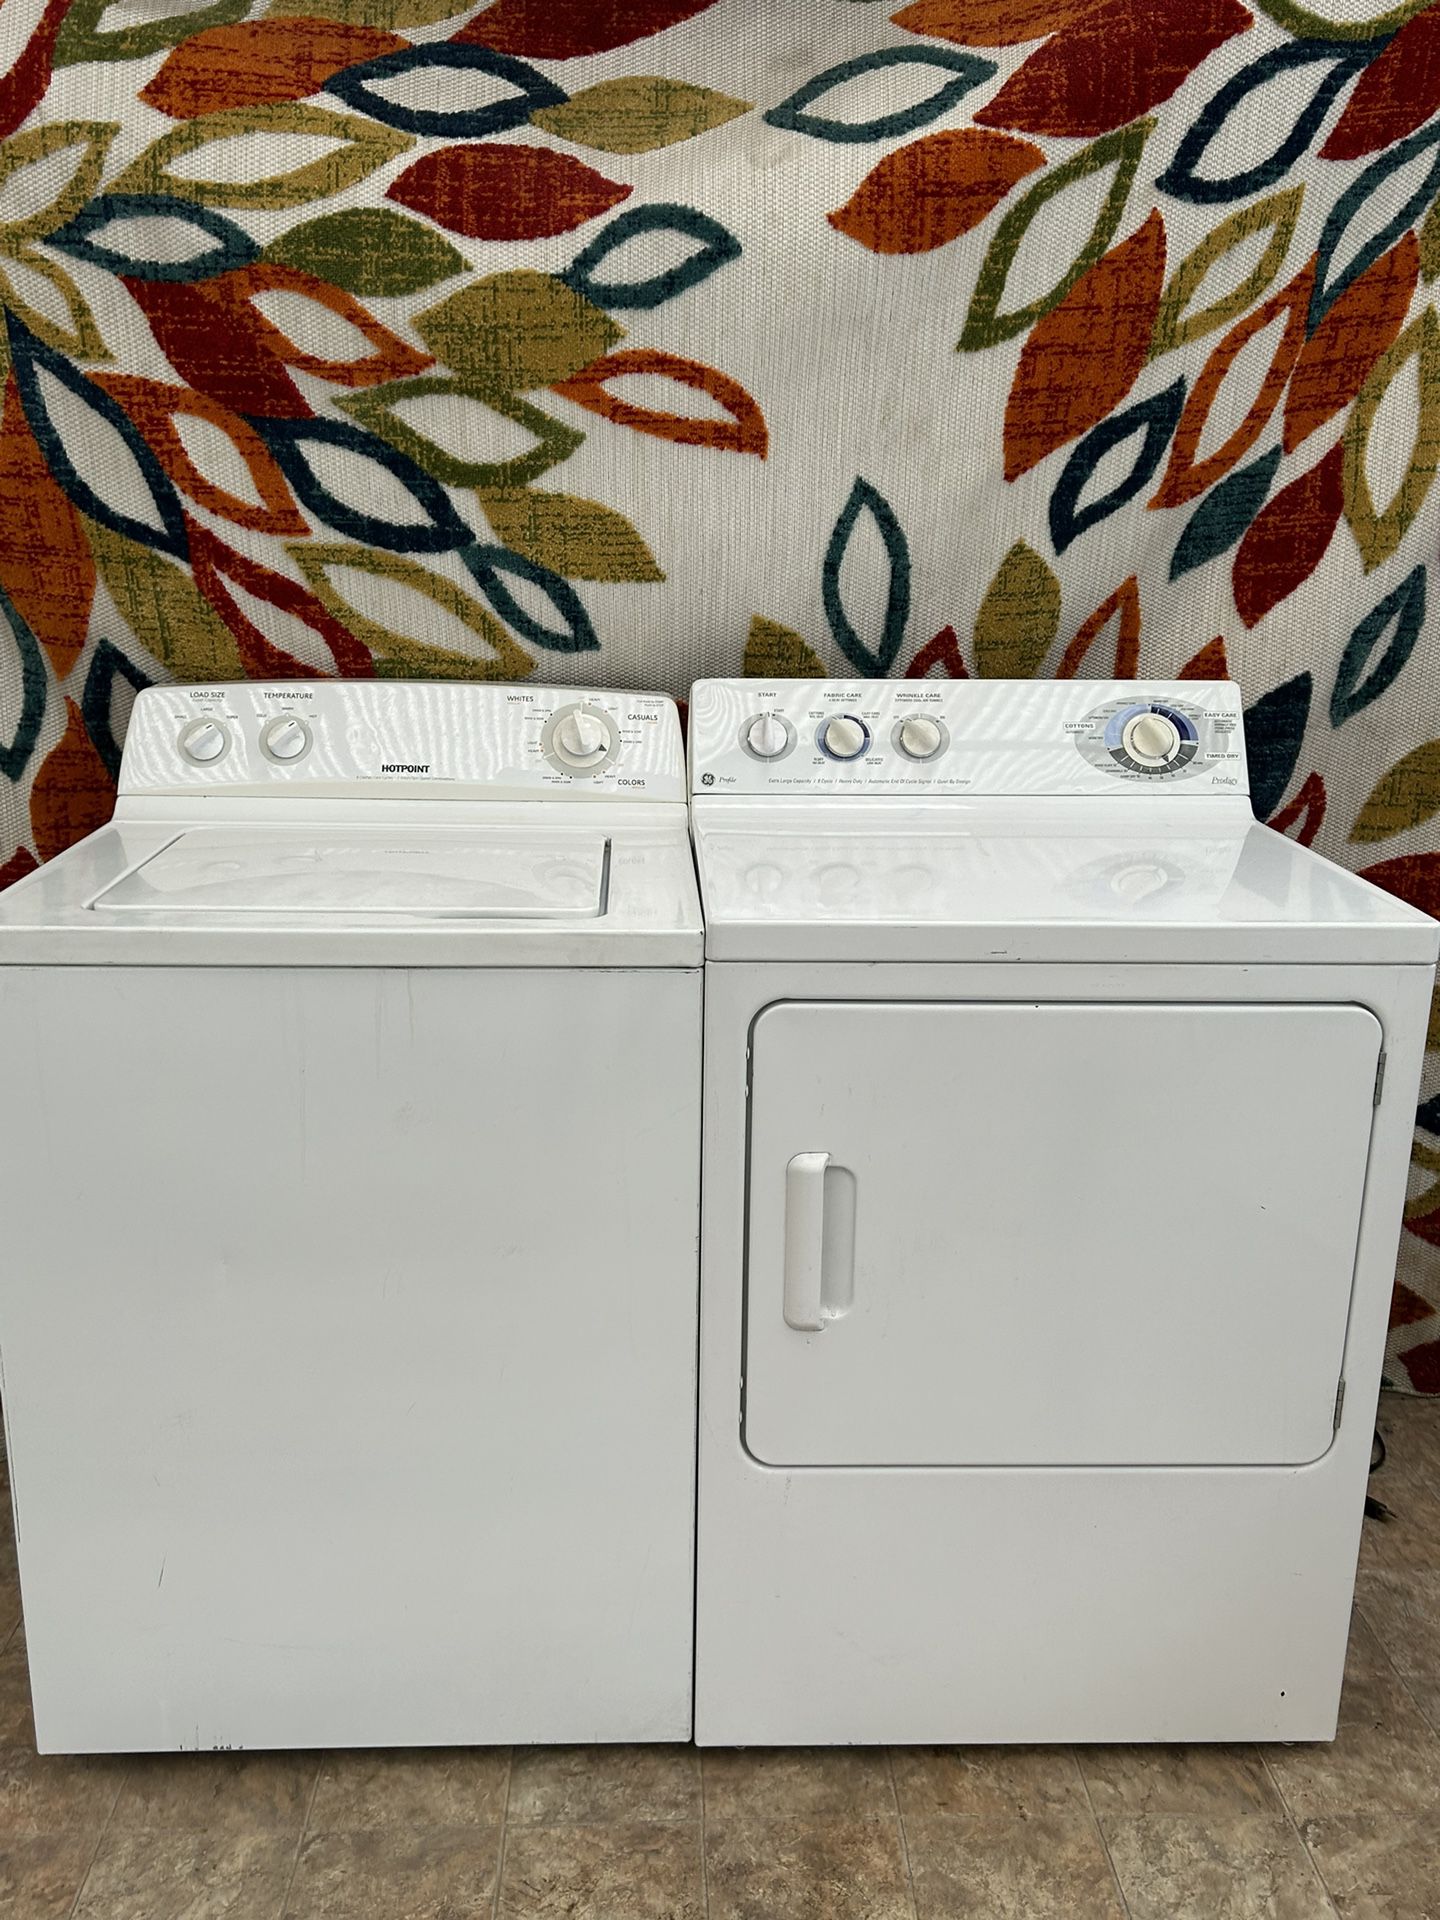 Washer And Dryer Set Gas Laundry 